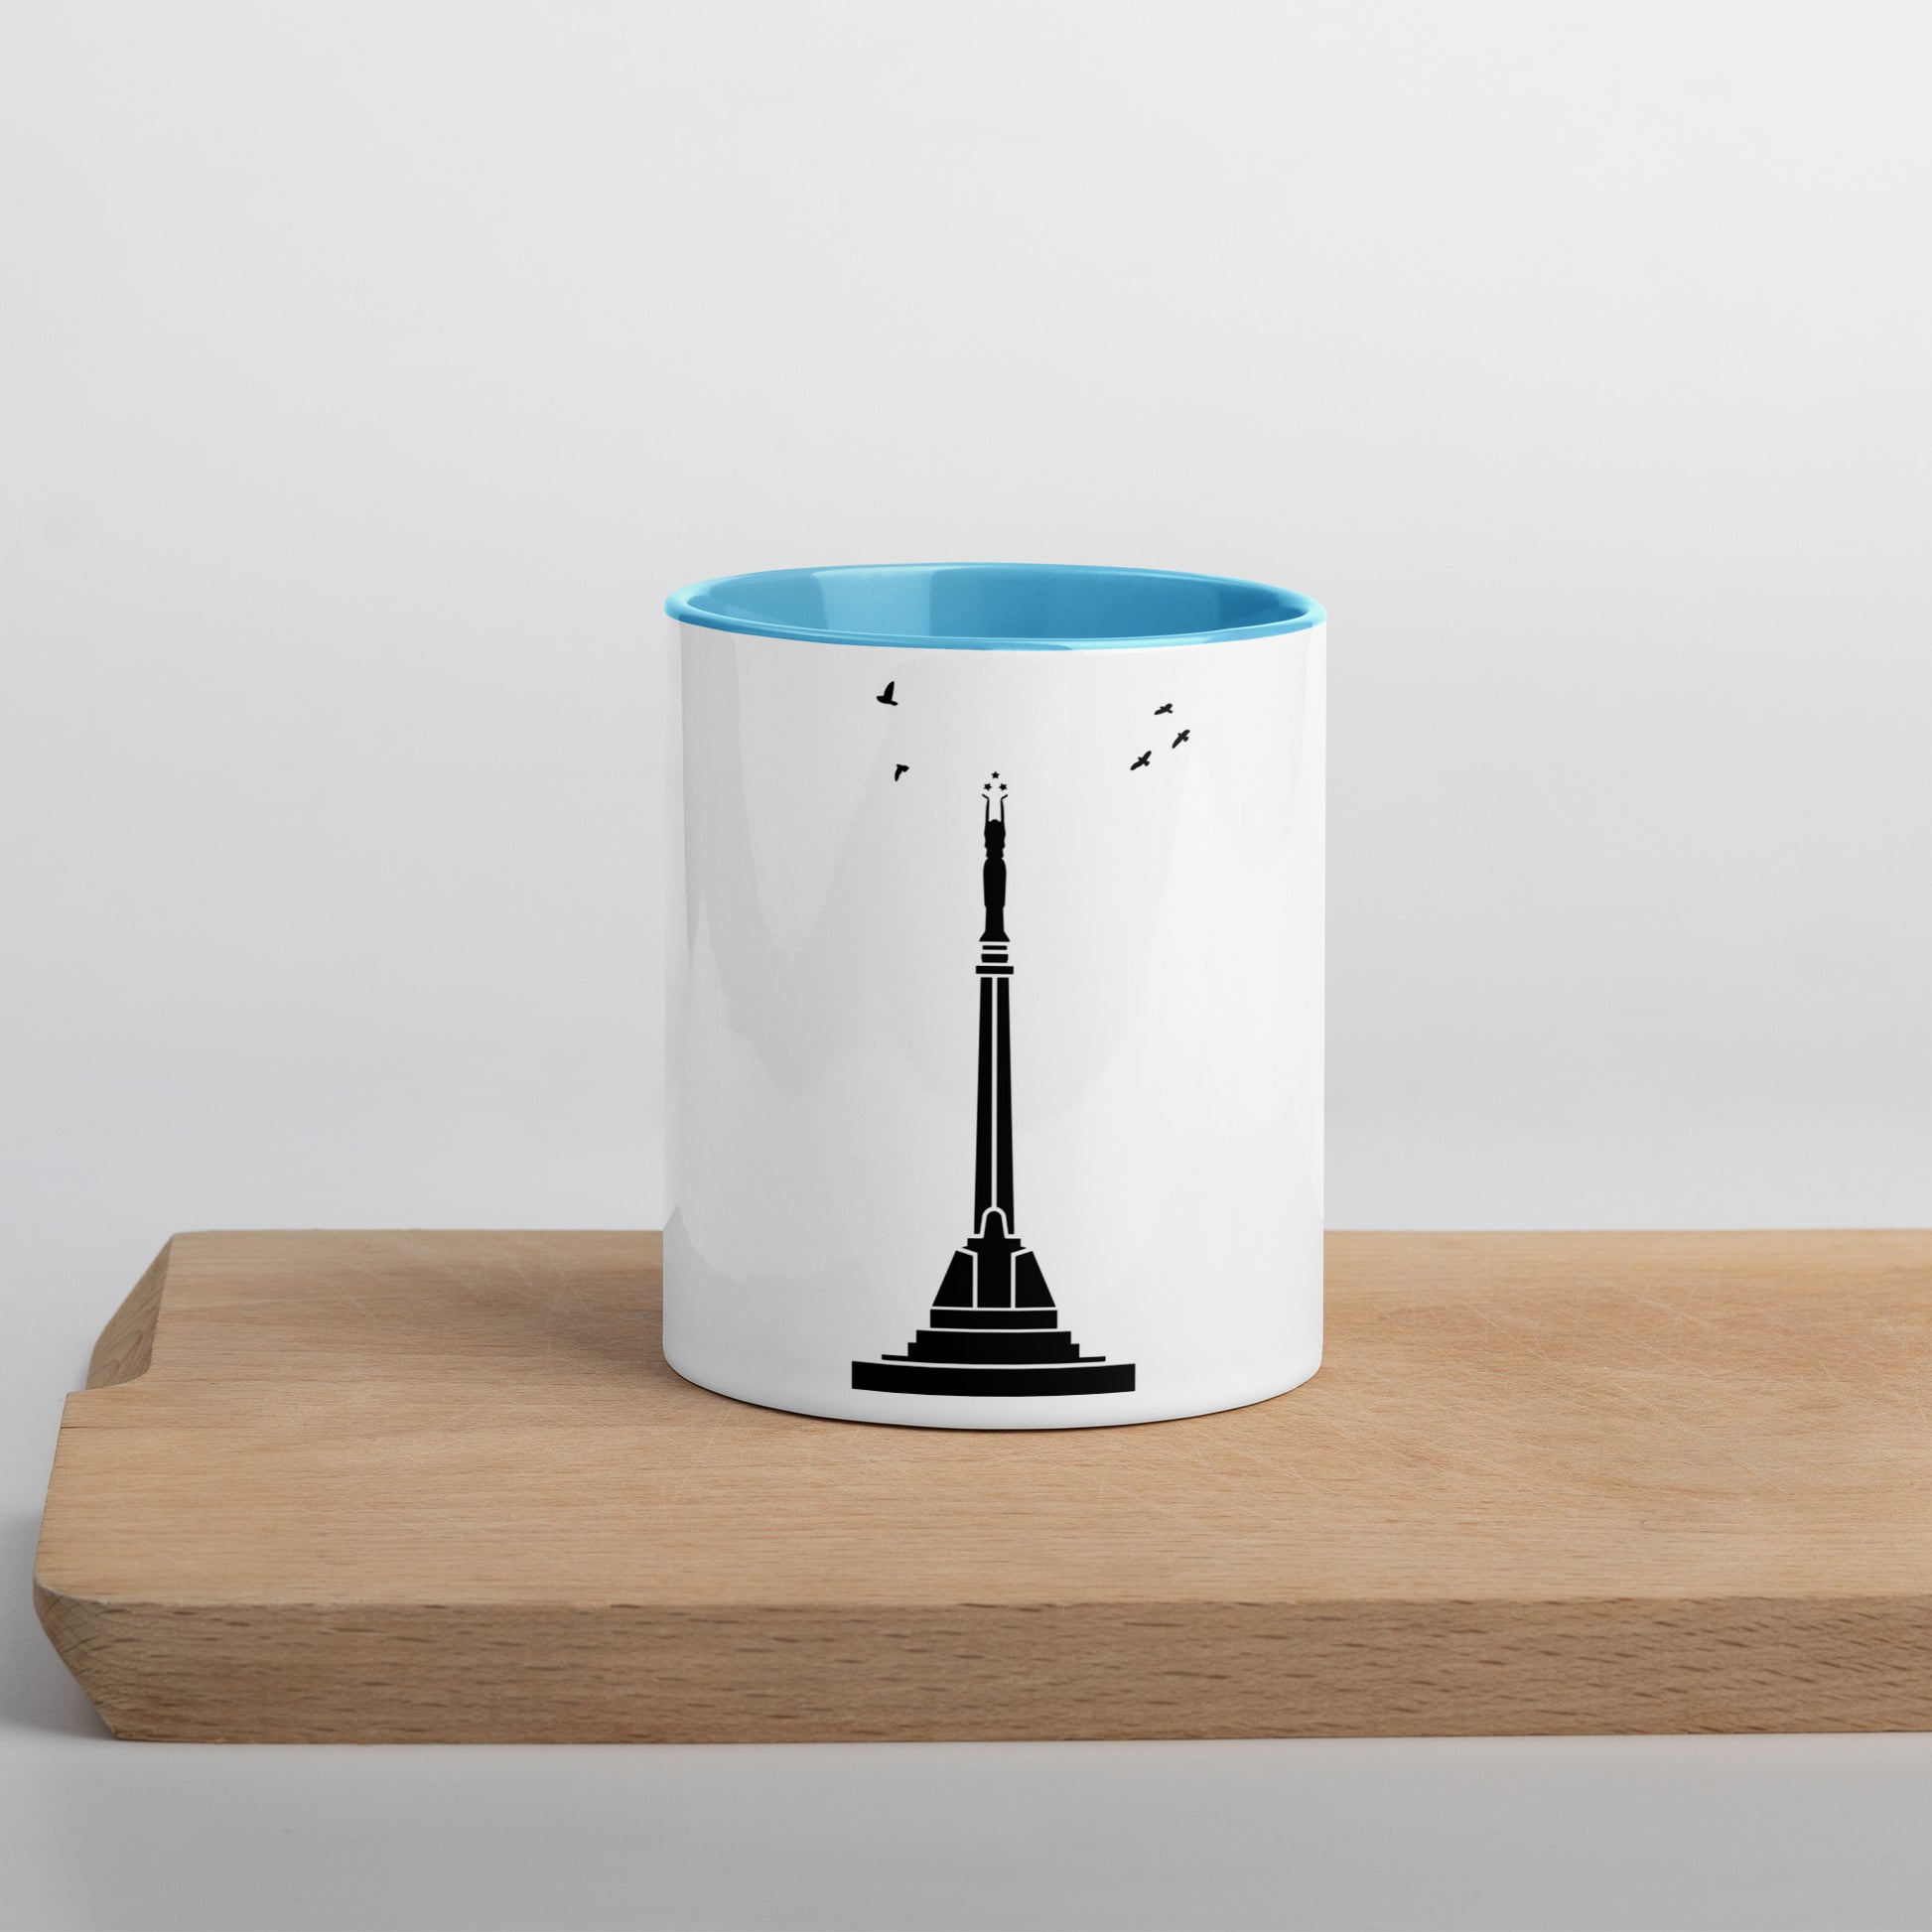 white coffee mug with blue inside featuring Riga's Liberty Monument